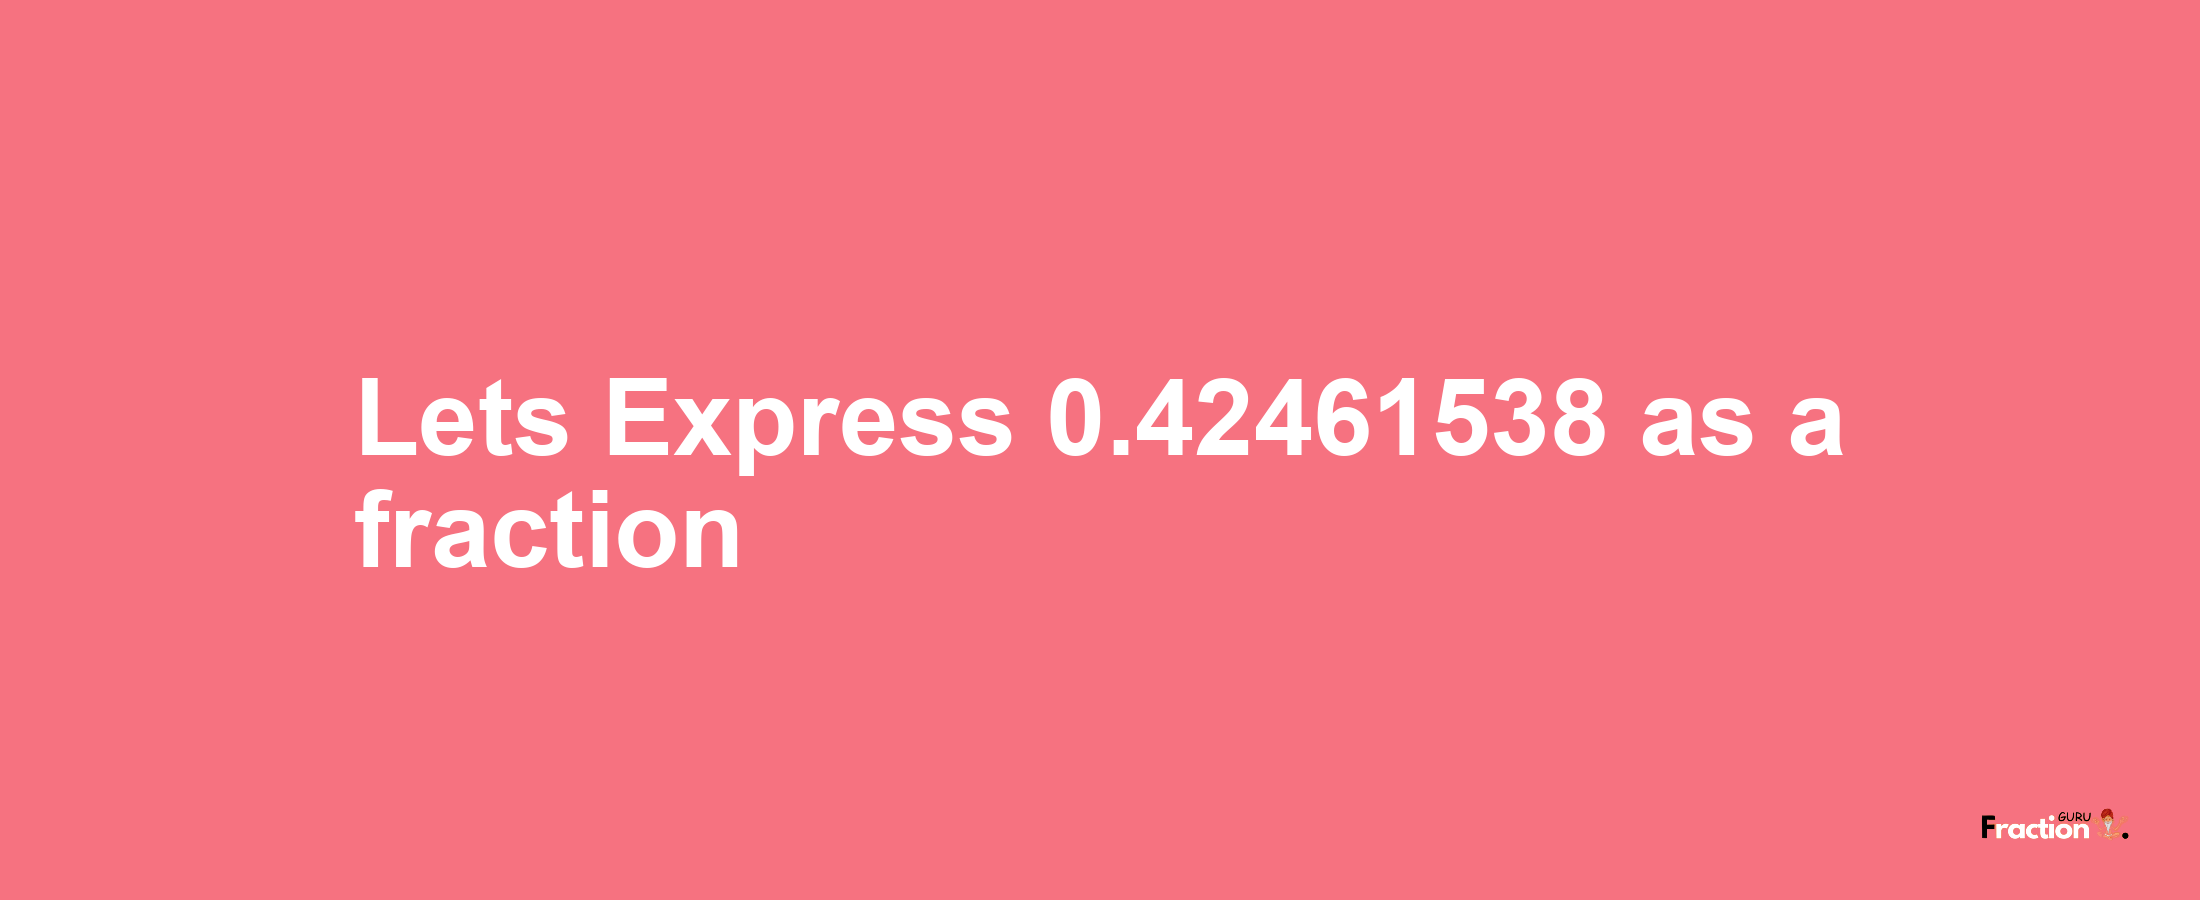 Lets Express 0.42461538 as afraction